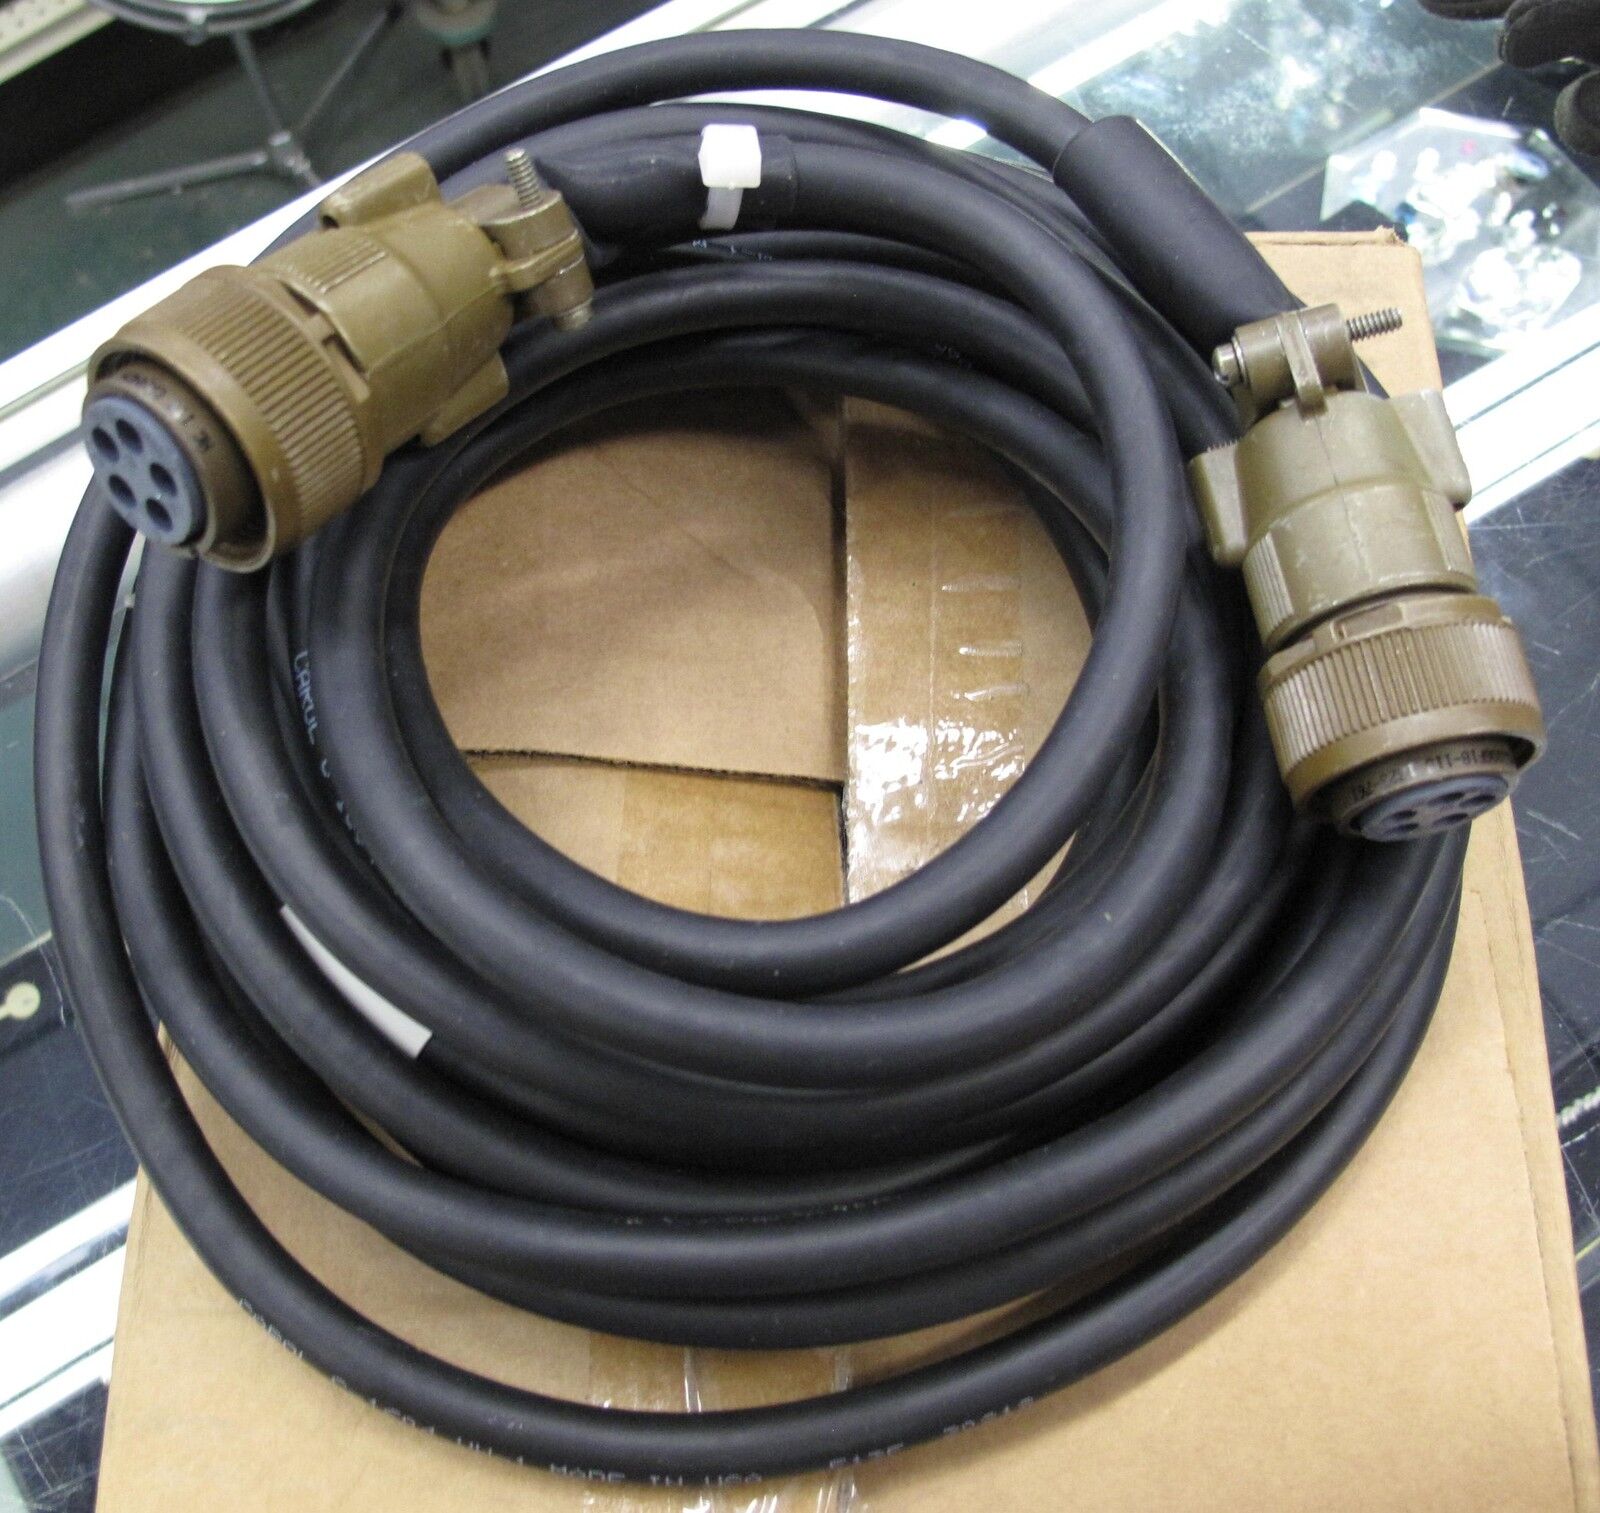 MILITARY TQG GENERATOR PARALLELING CABLE 6150-01-406-9533 88-22209 MEP 804A 805A